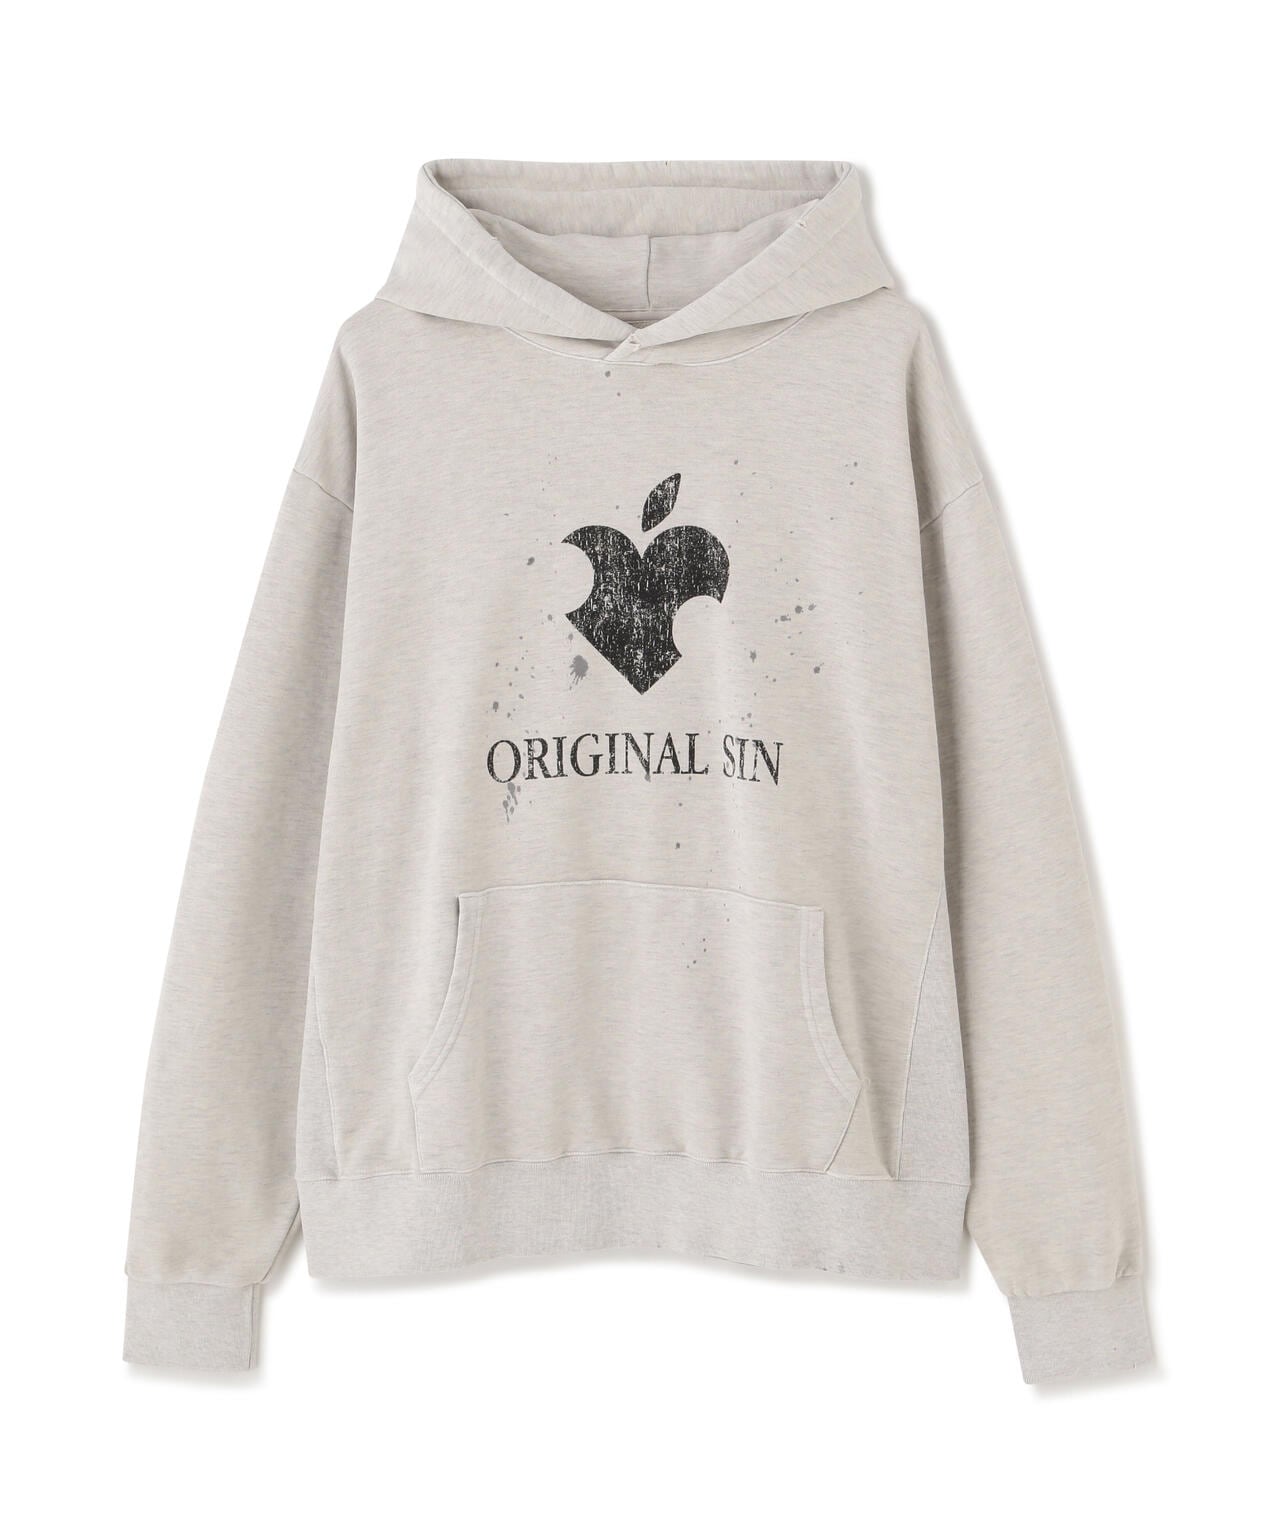 SOMEIT/サミット/O.S VINTAGE HOODIE/ヴィンテージパーカー | LHP ...